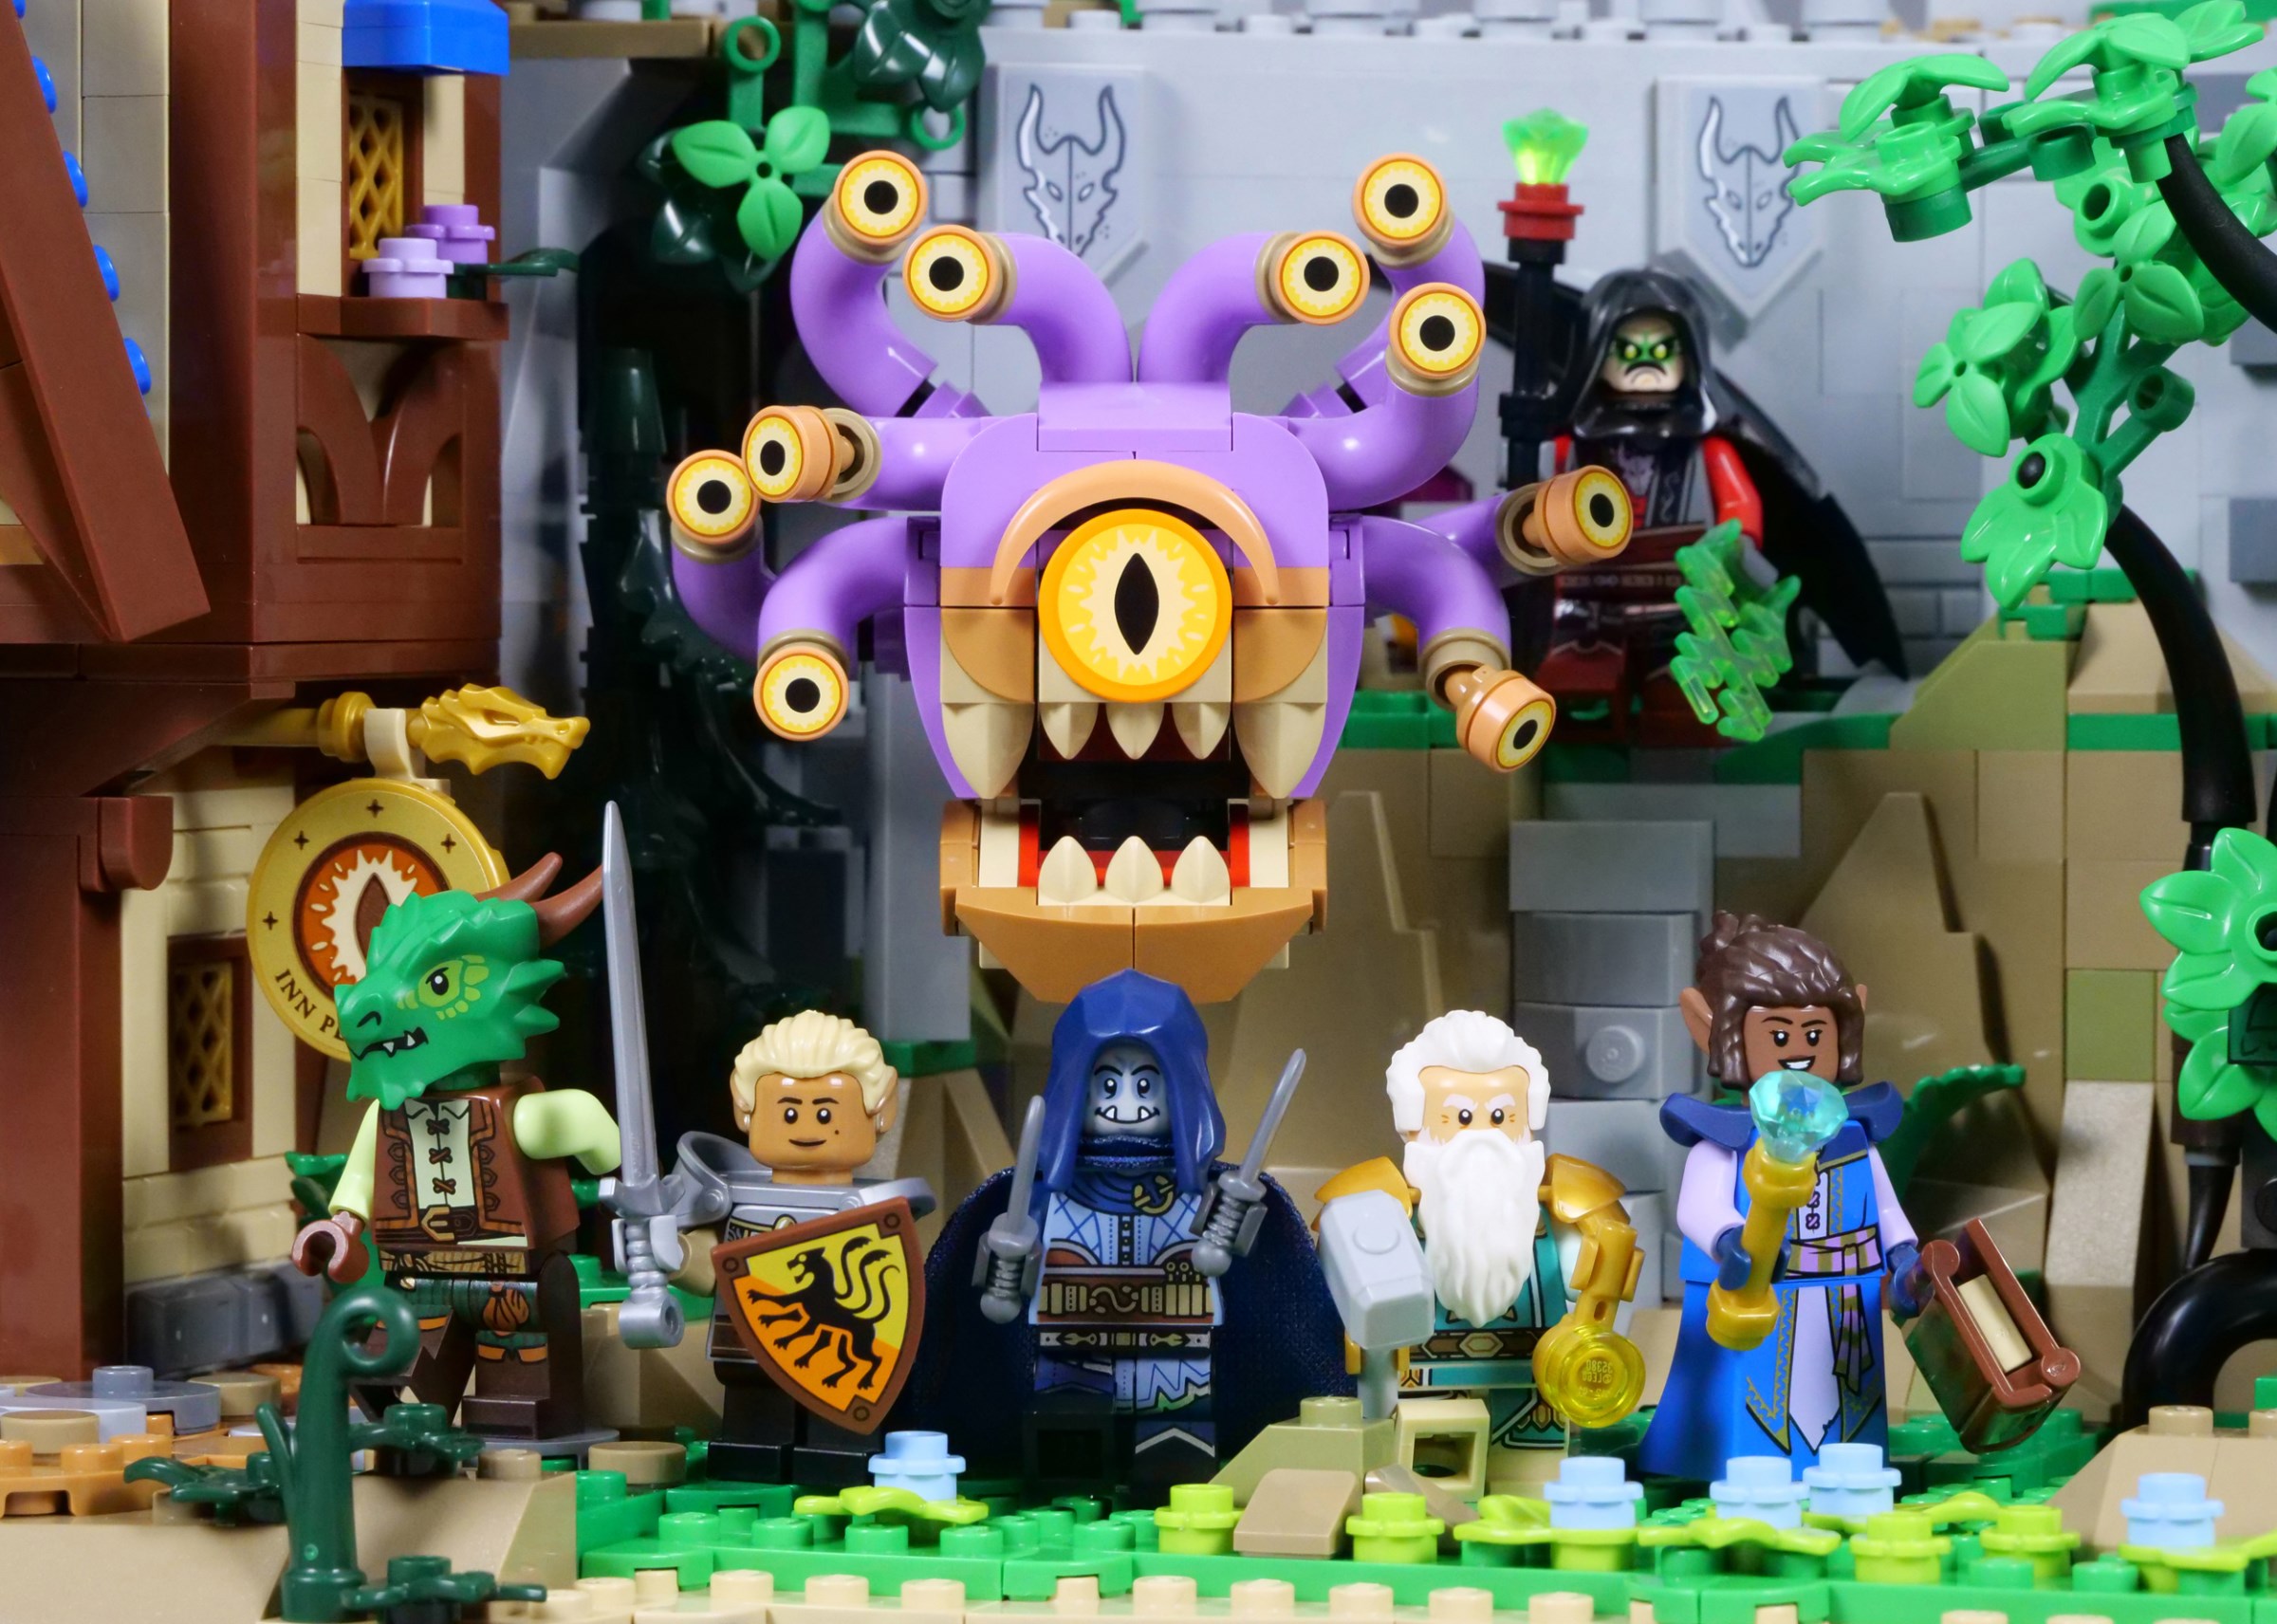 Lego's 3,745-piece D&D set comes with its own playable adventure